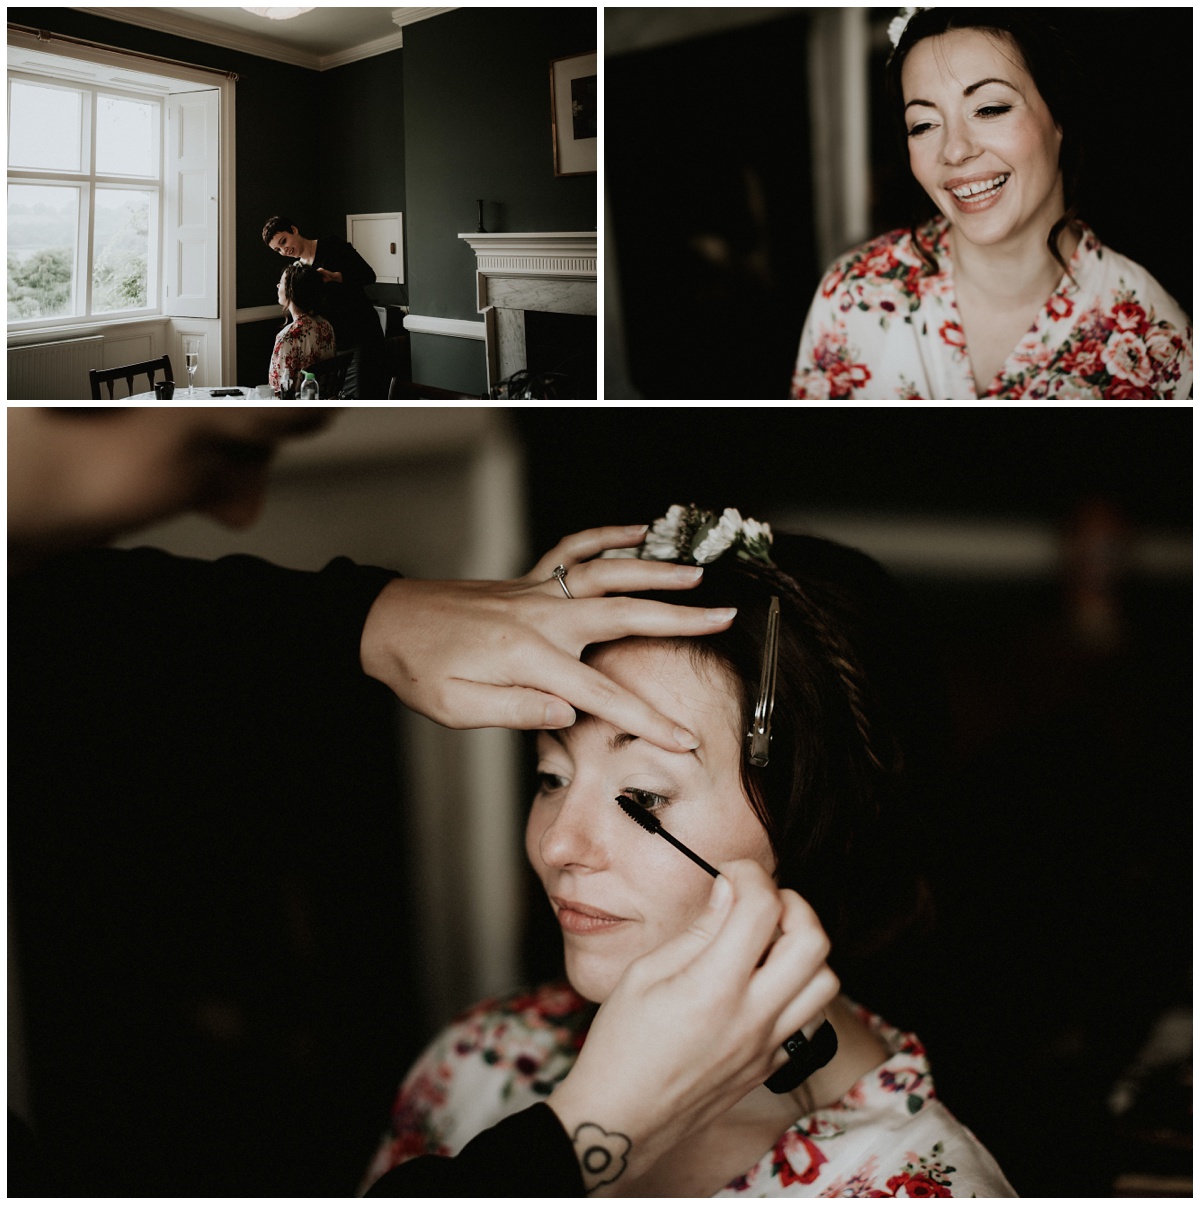 Make up by Omie Megan, Photograph by Lauren Scotti Photographer